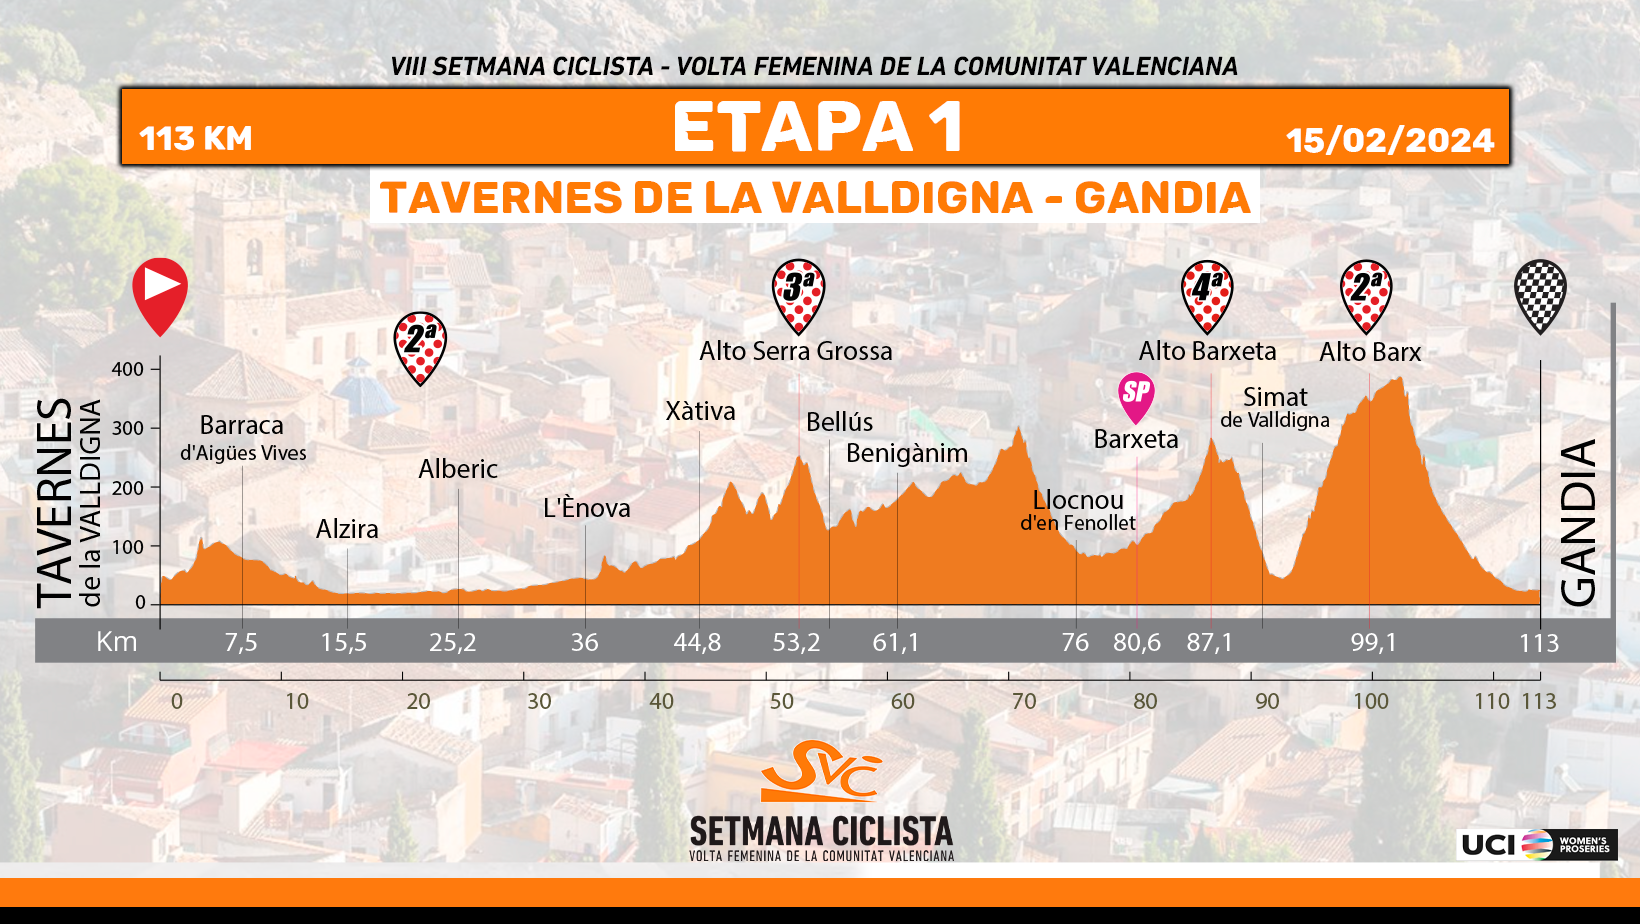 Profile of the first stage of the Setmana Ciclista Valenciana, showing a lumpy profile with a number of climbs, including a summit less than 10km from the finish.